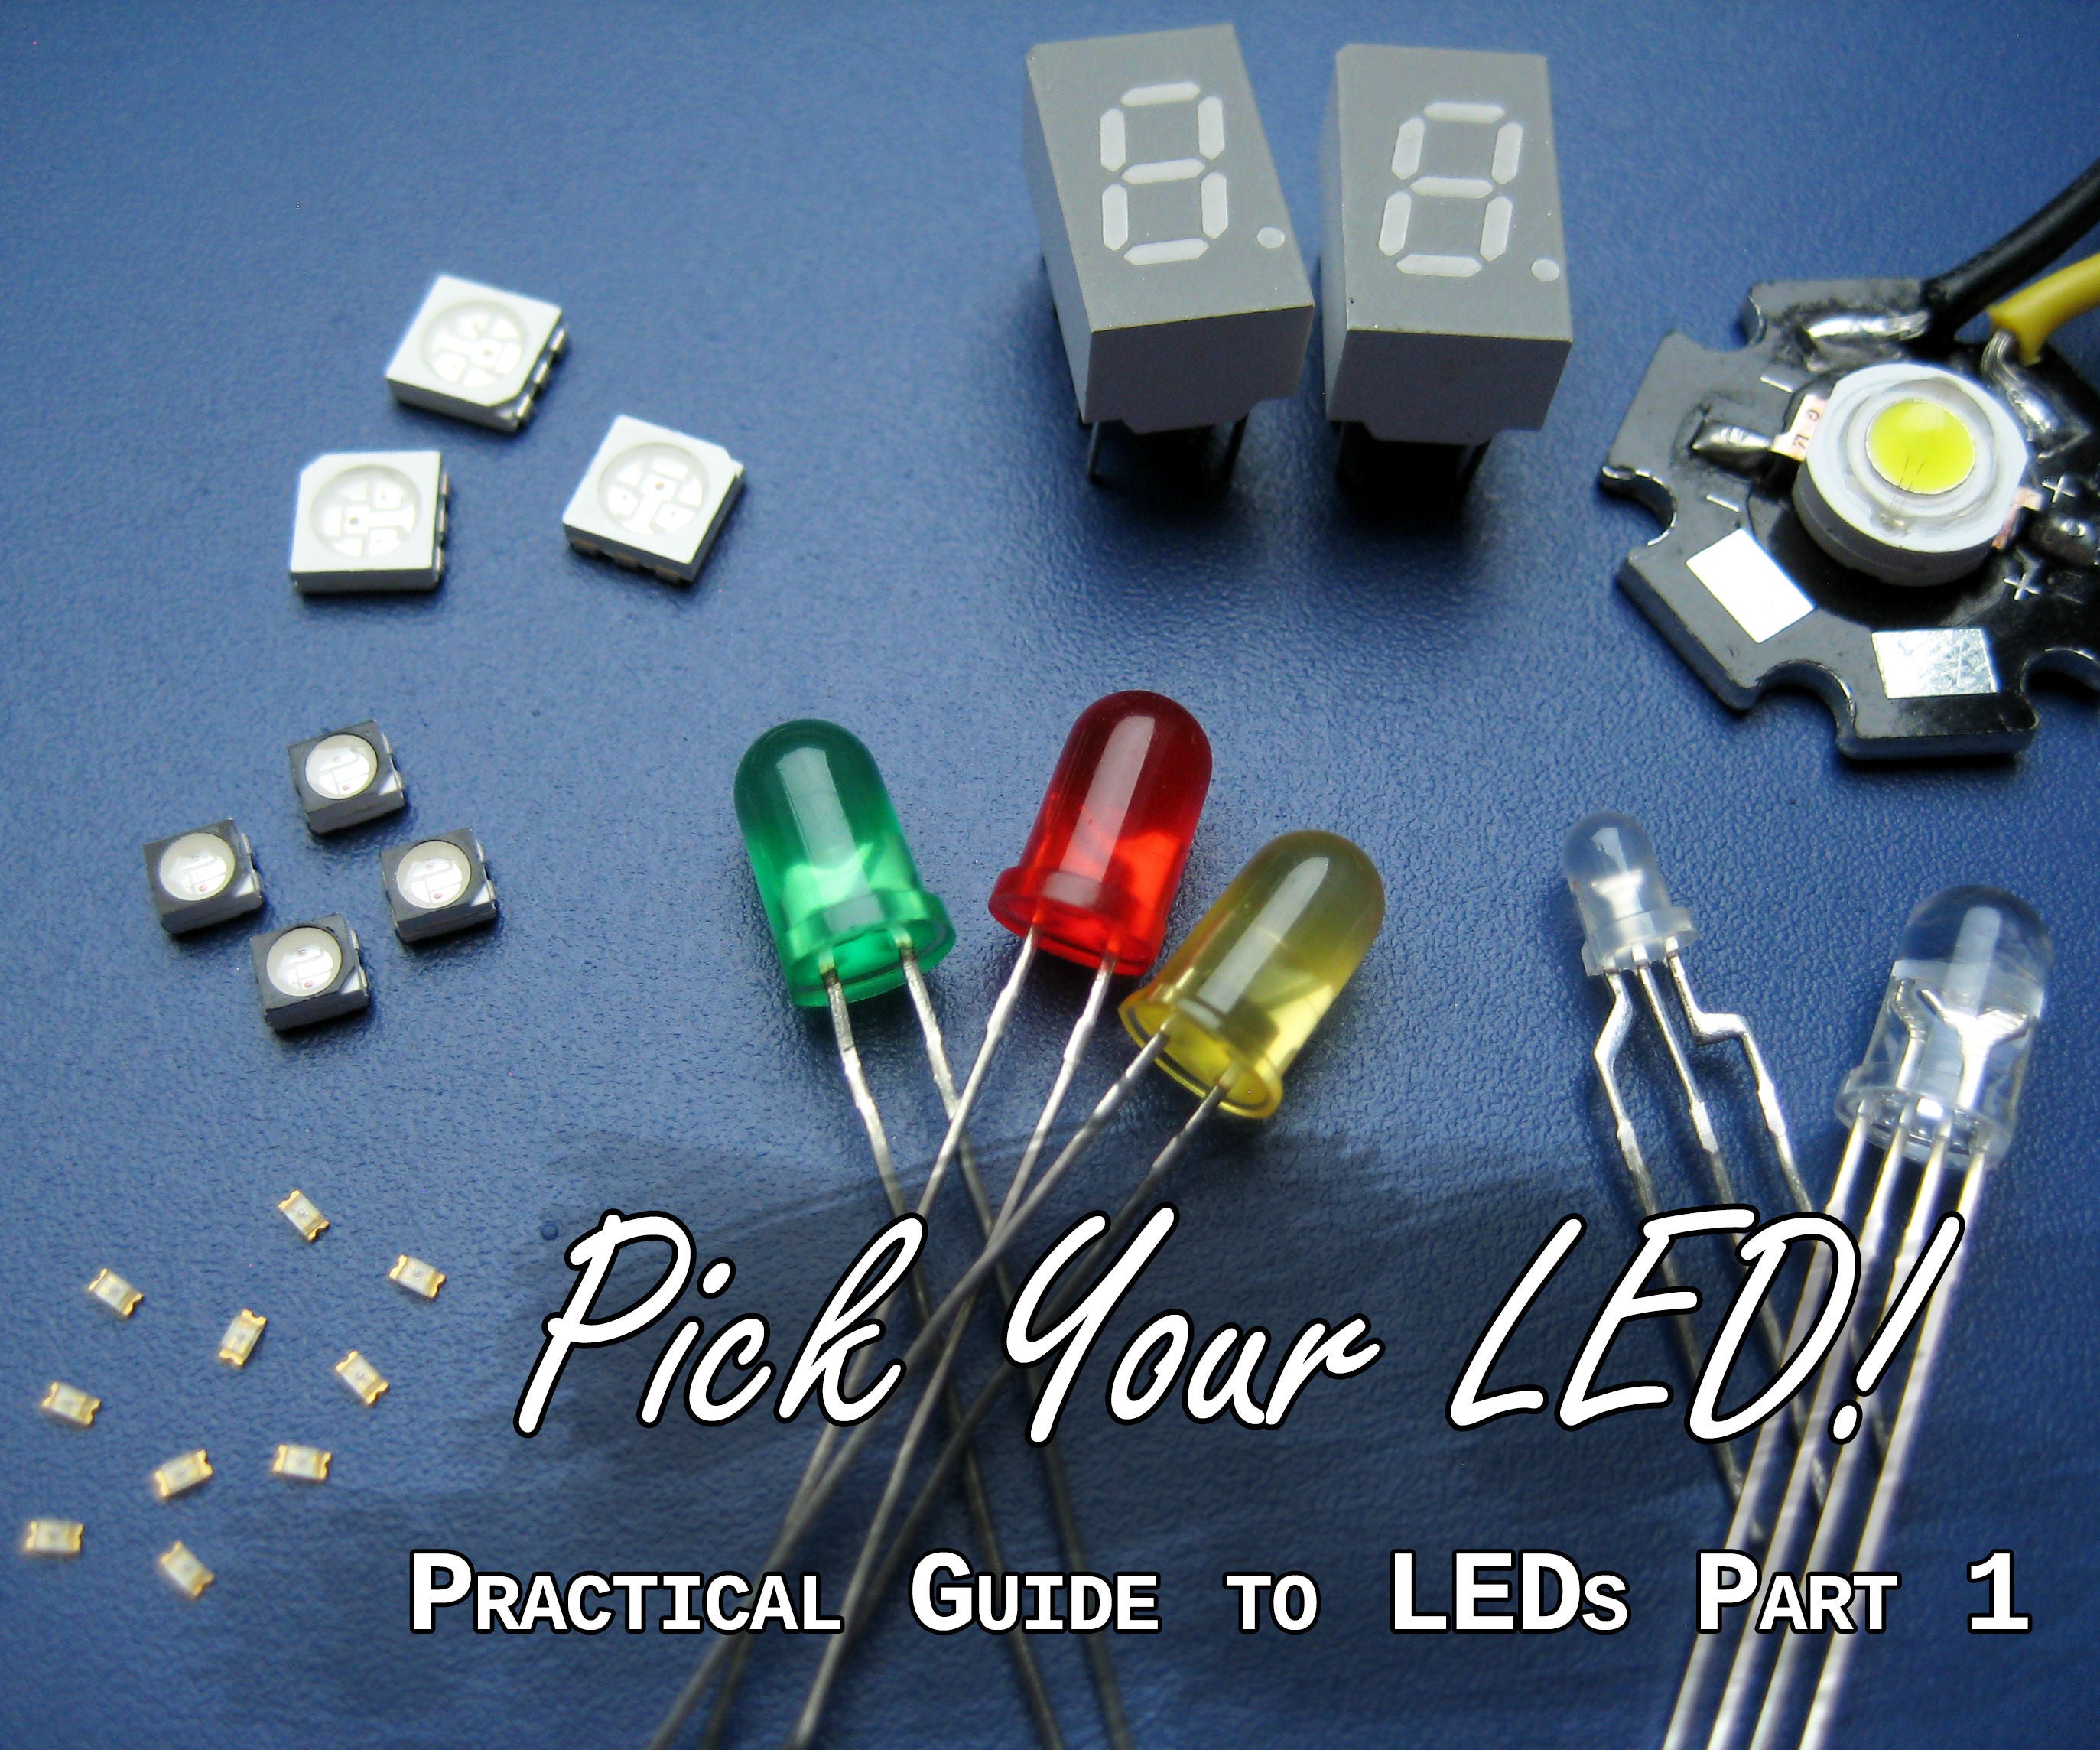 Practical Guide to LEDs 1 - Pick Your LED!